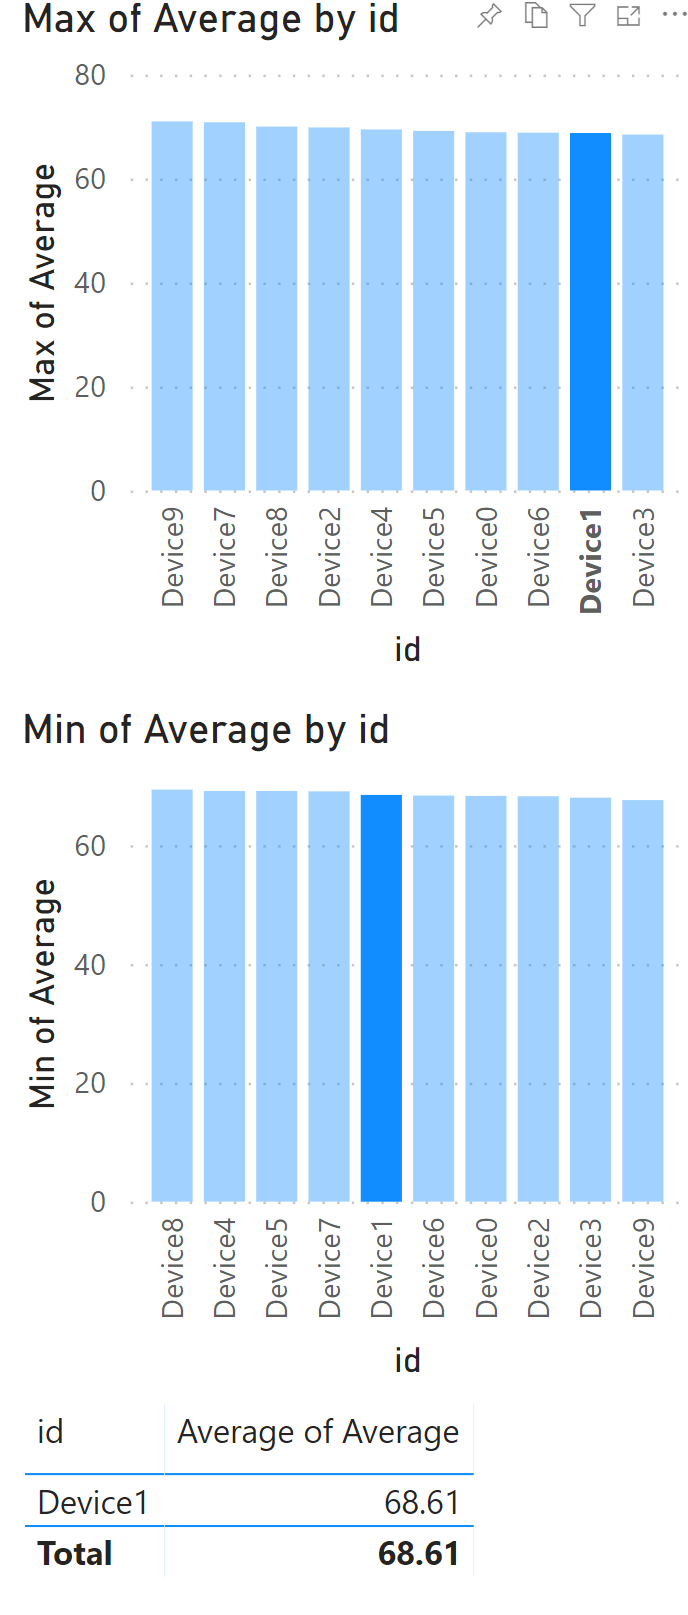 The report window has two bar graphs: Max of average by id, and Min of average by id. Both bar charts list data for Device0, Device1, Device3, Device8, and Device9. Device1 is selected. Below the bar charts, a table displays data for Device1, with an Average of average value of 68.61.